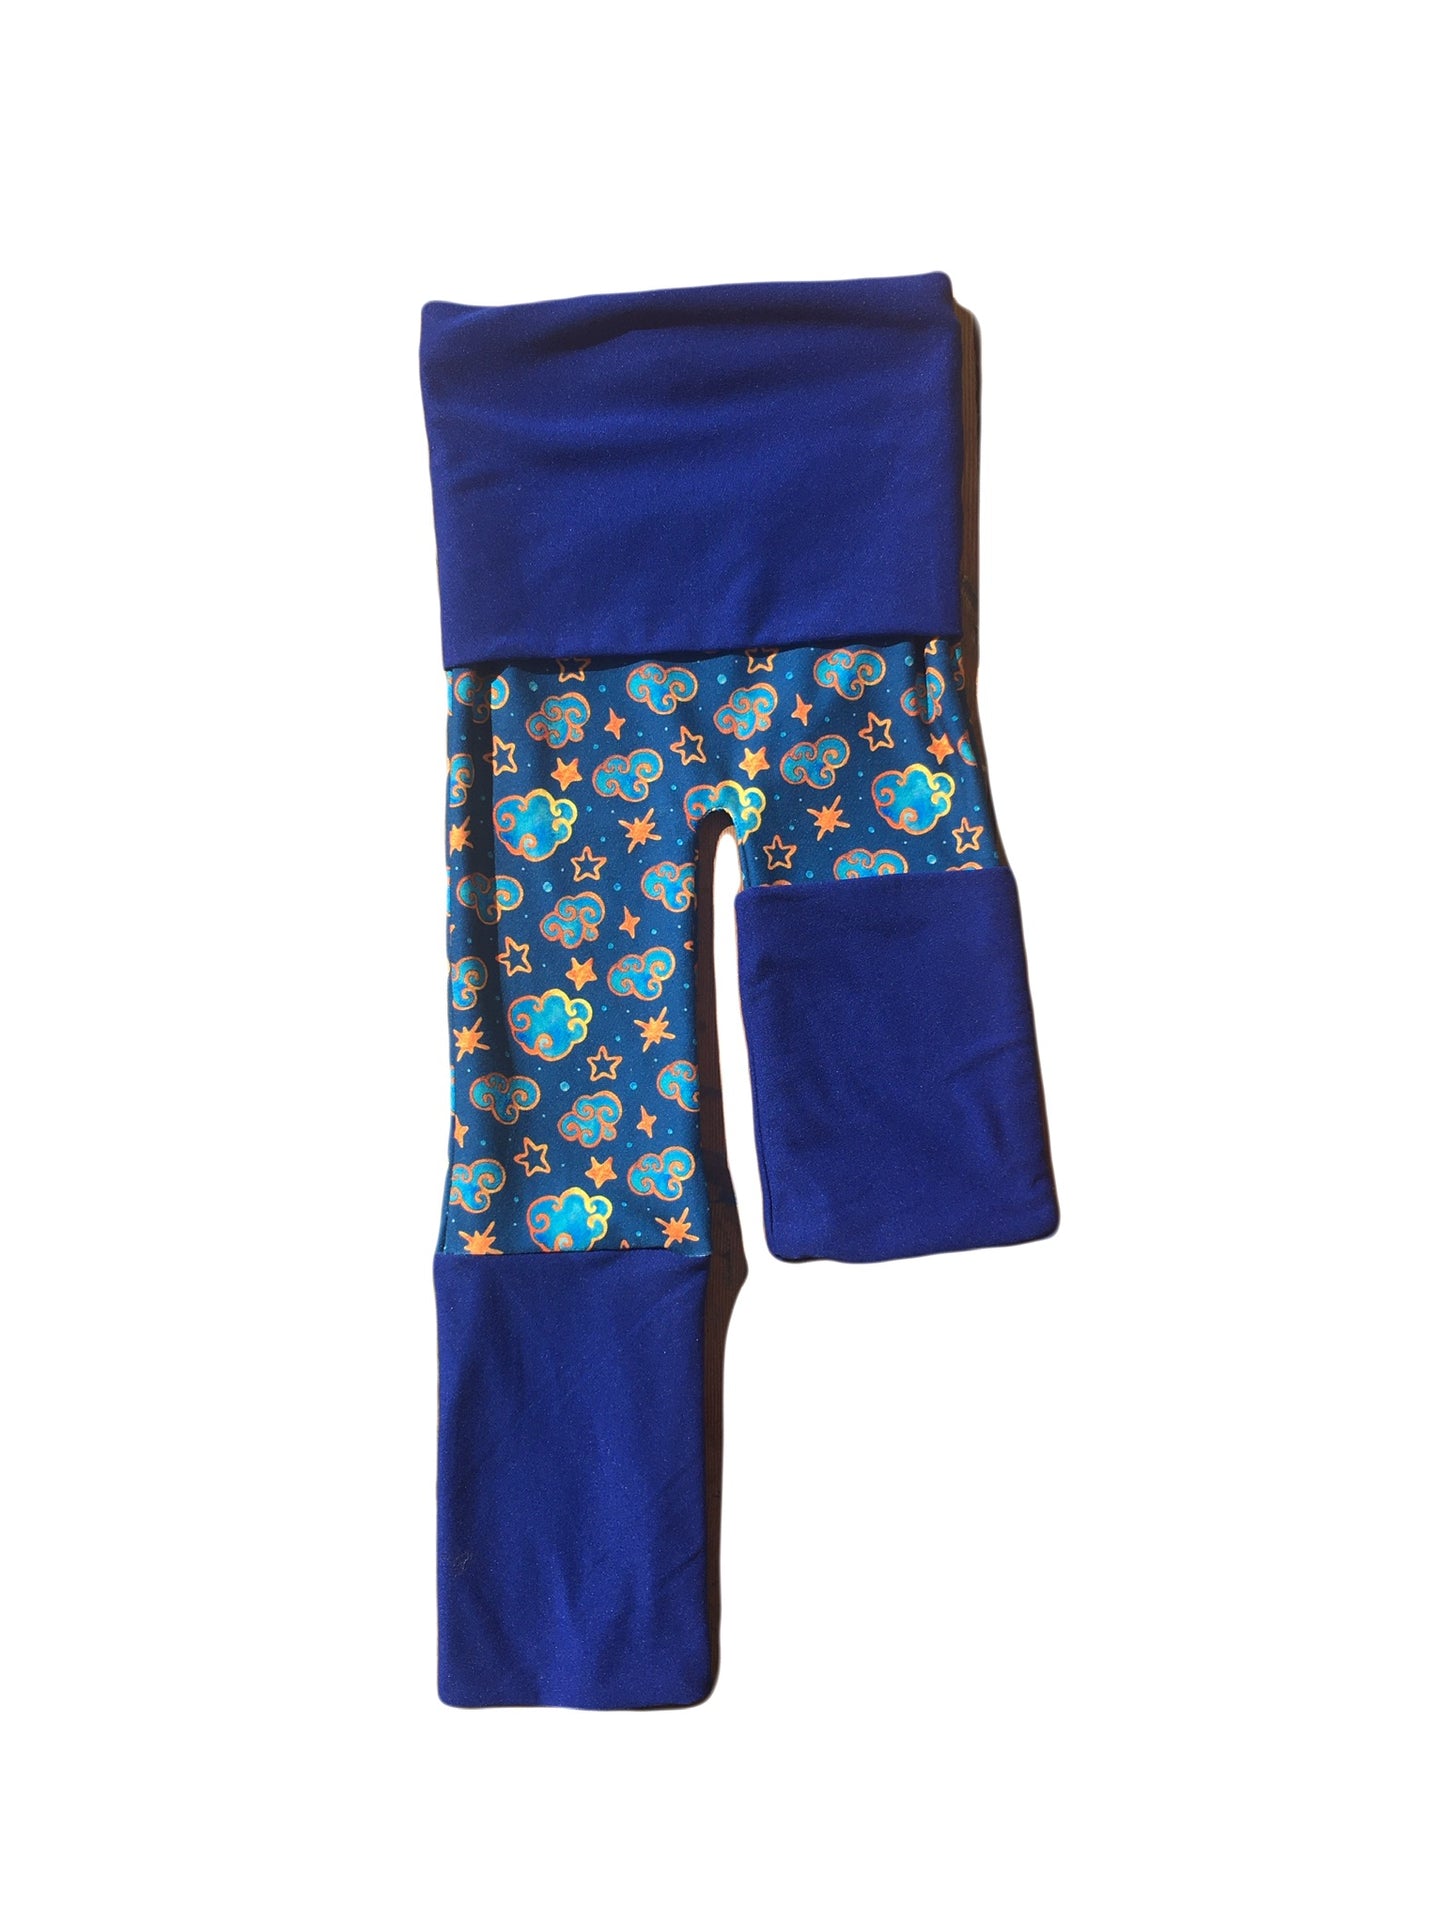 Adjustable Pants - Clouds with Dark Blue